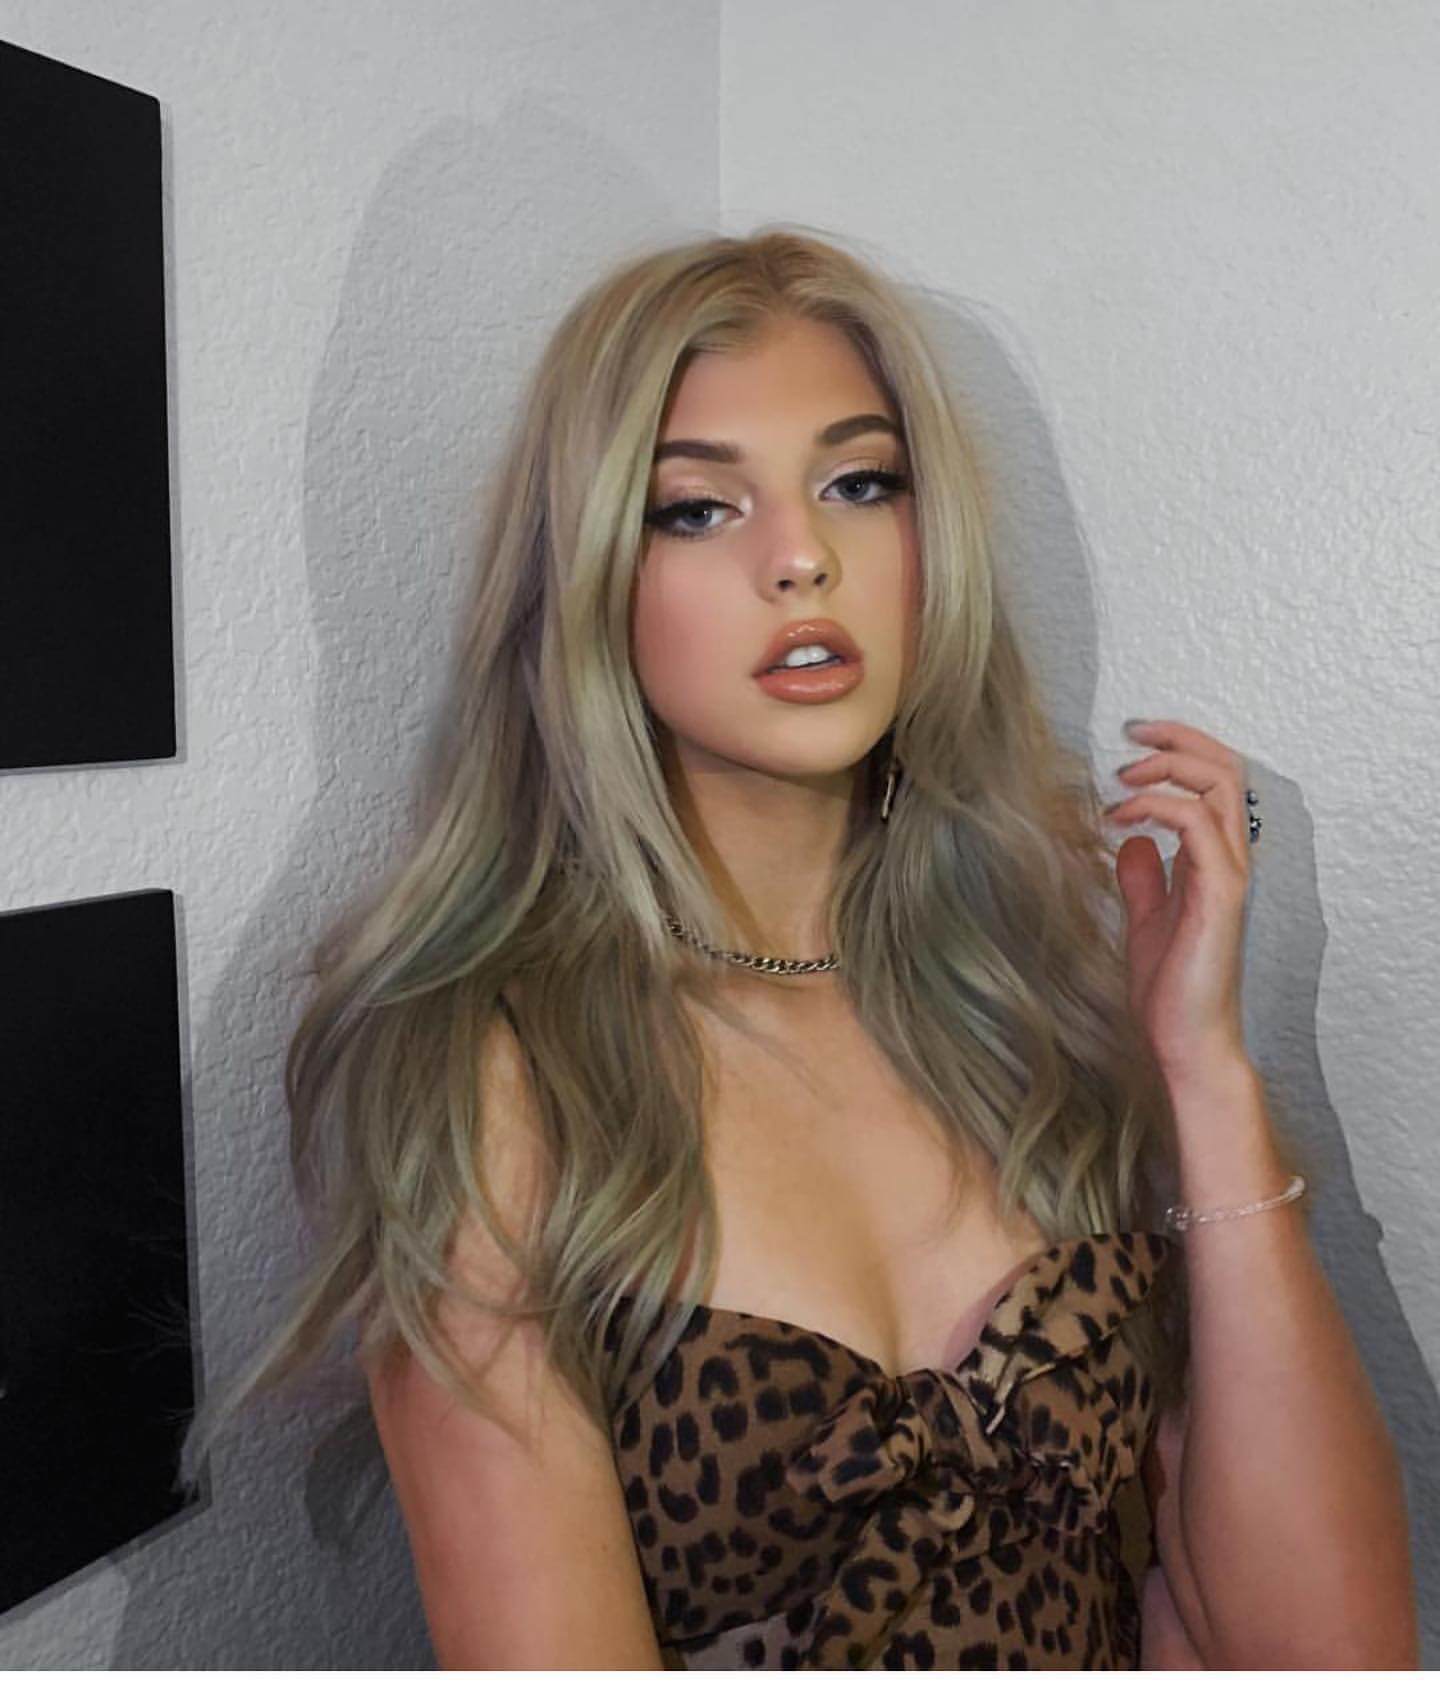 61 Sexy Loren Gray Boobs Pictures Are A Treat For Fans | Best Of Comic Books